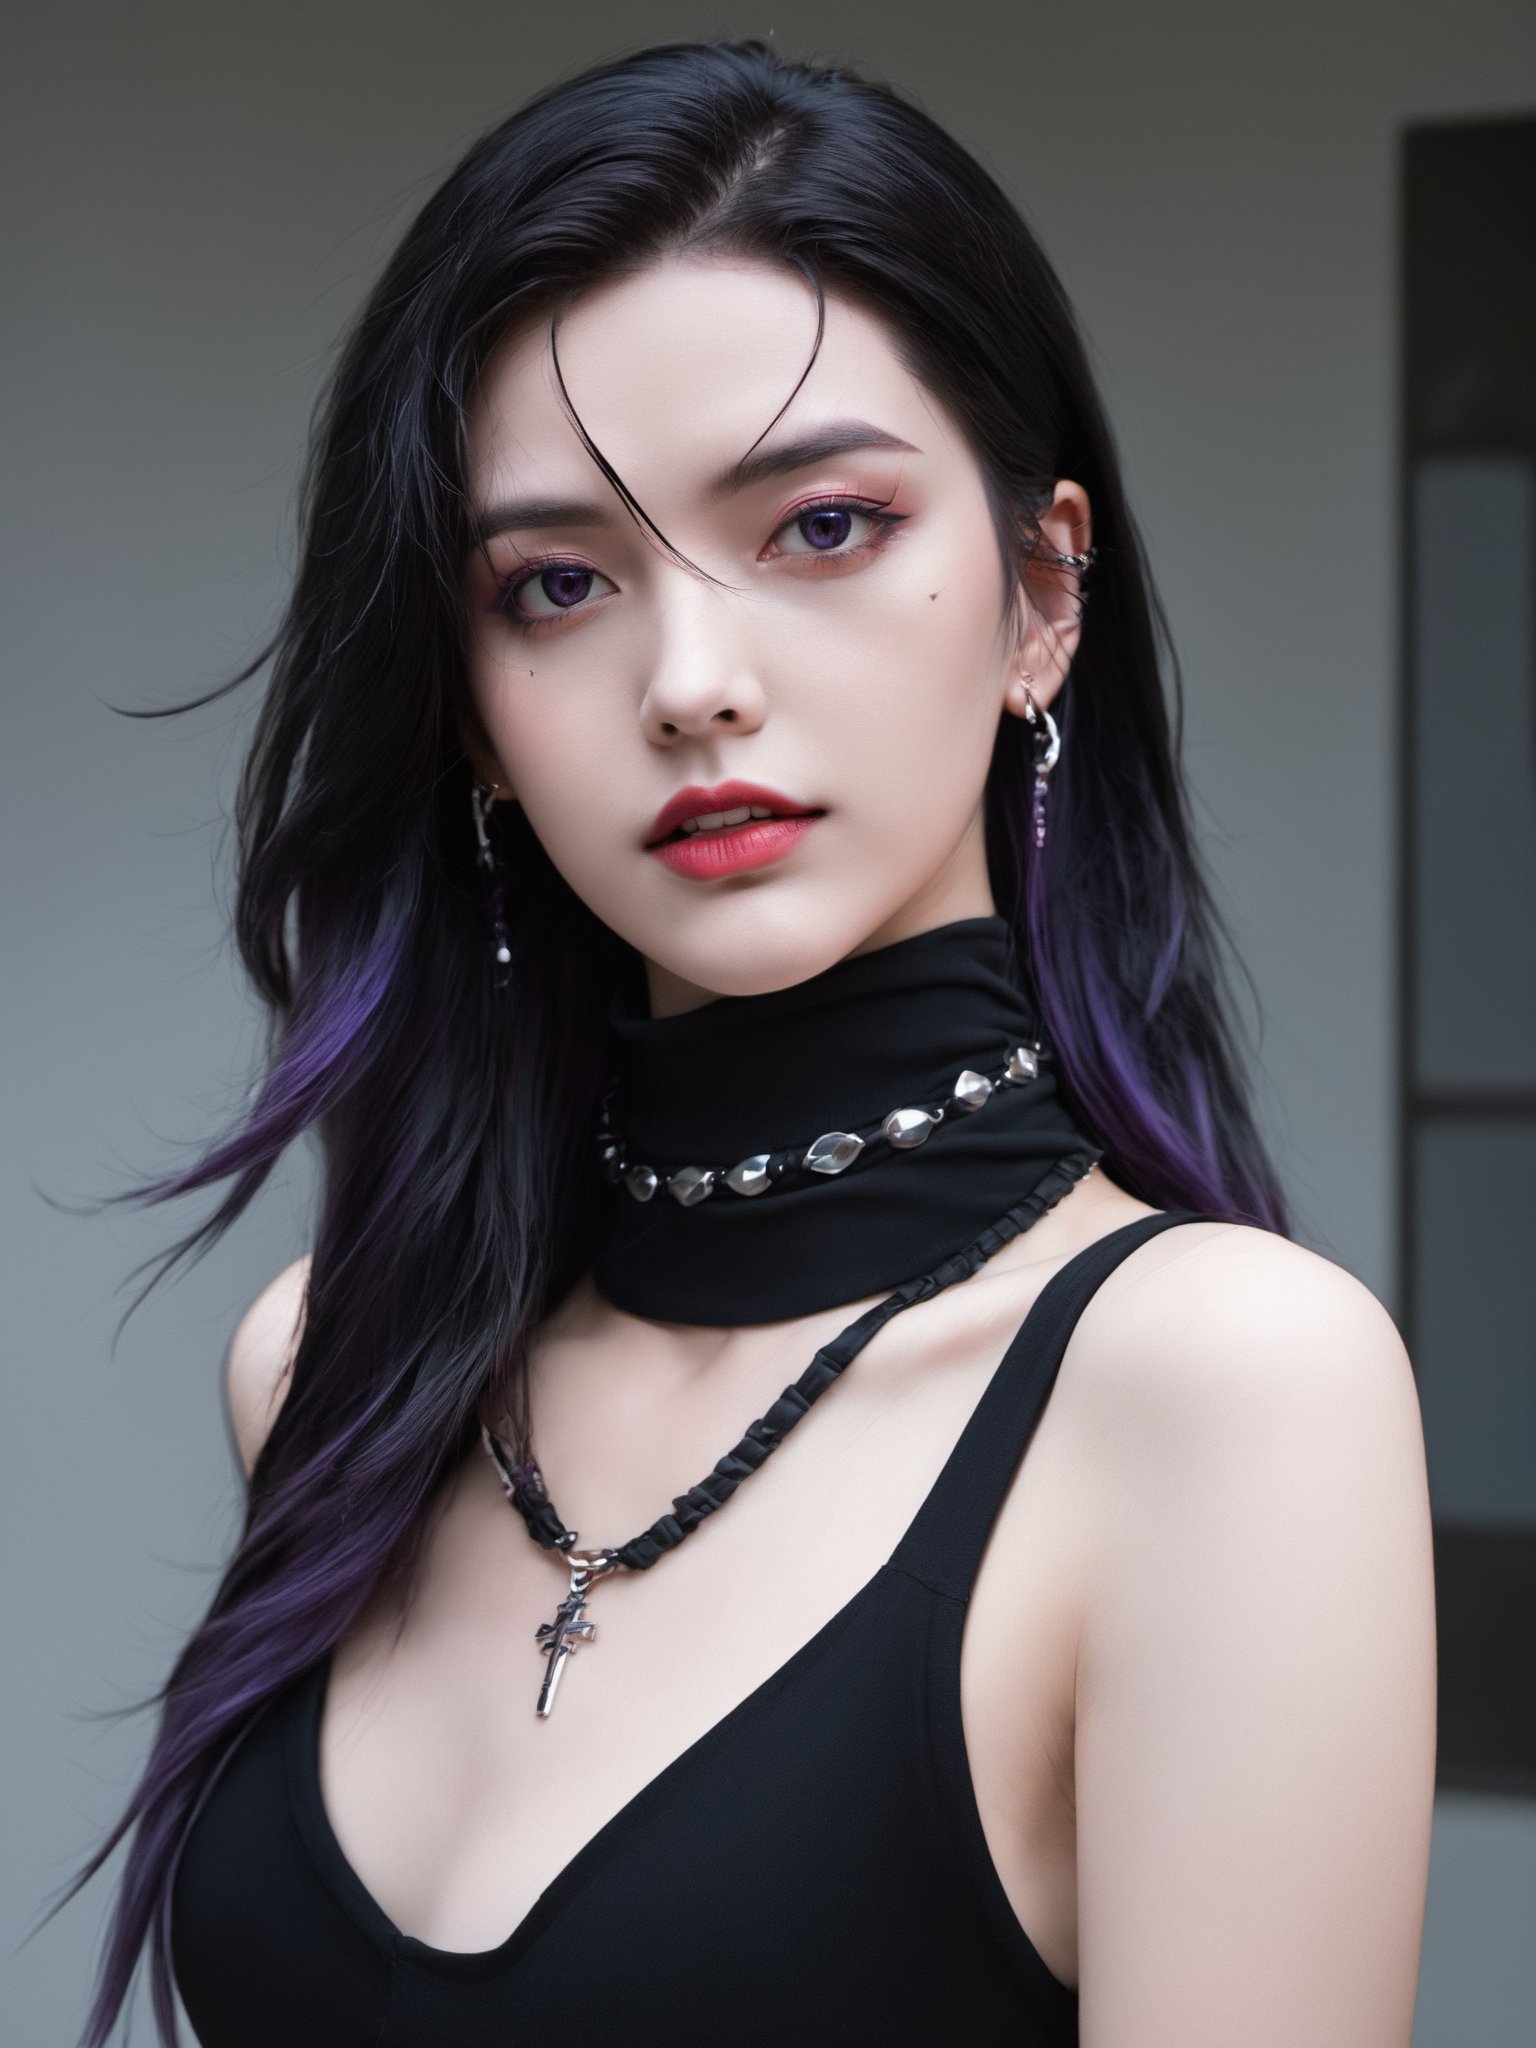 Goth girl,goth girl 1girl,1girl,solo,looking at viewer,long hair hair,black hair,red IncursioDipDyedHair,asymmetrical hairstyle,undercut,one side of head buzzed,bare shoulders,hair covering one eye,from above,sleeveless,purple eyes,necklace,eyebrow piercing,two-tone hair,lips,makeup,lipstick,crowded dance club,spot color,full body,cleavage,SkinHairDetail,girl's hands on the wall,pov,black combat boots,